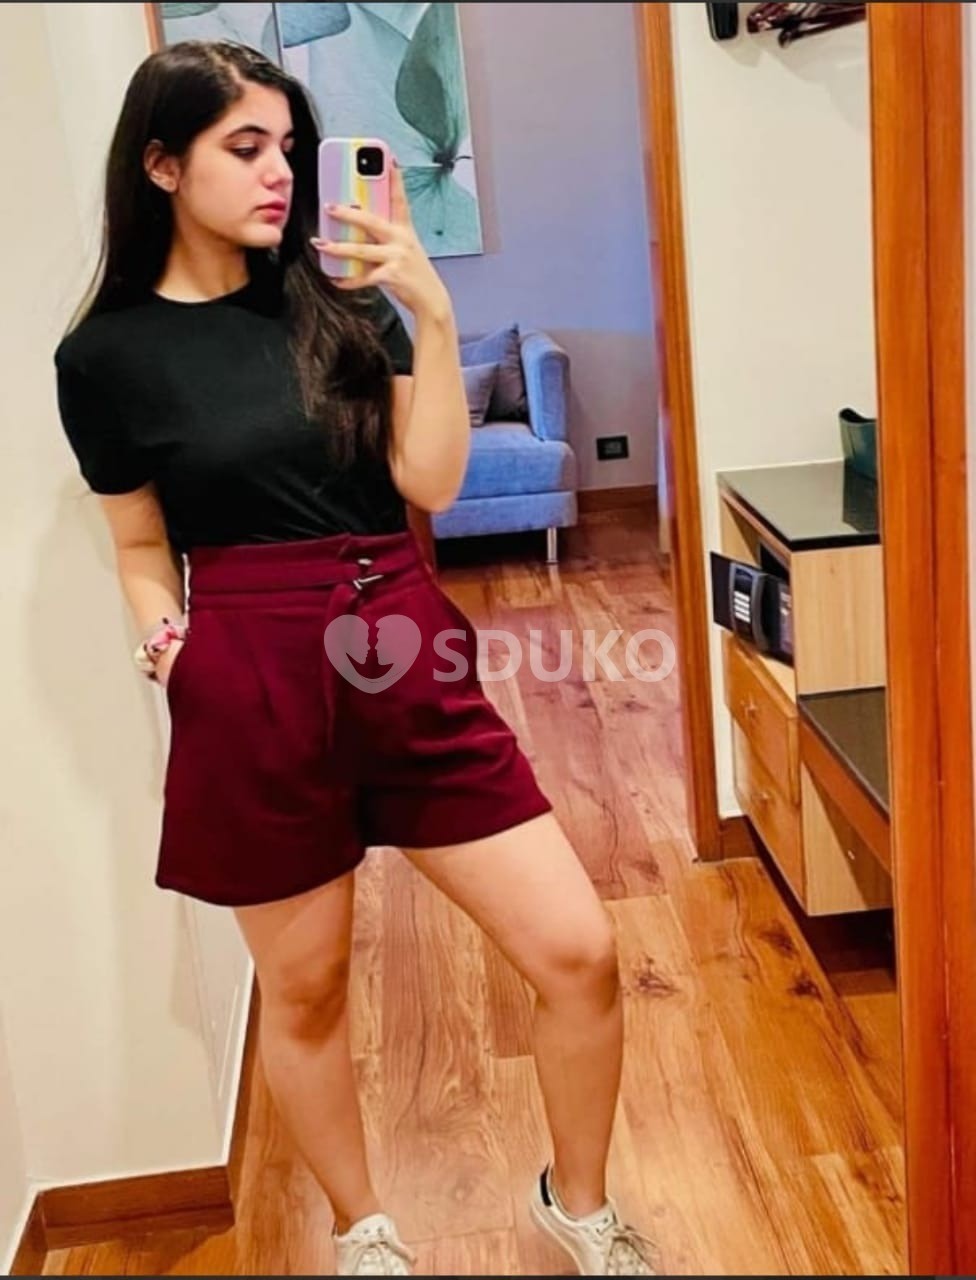 Gurgaon ❣️💯 VIP full satisfied service 24 hour available call me high profile low price independent call girl ser